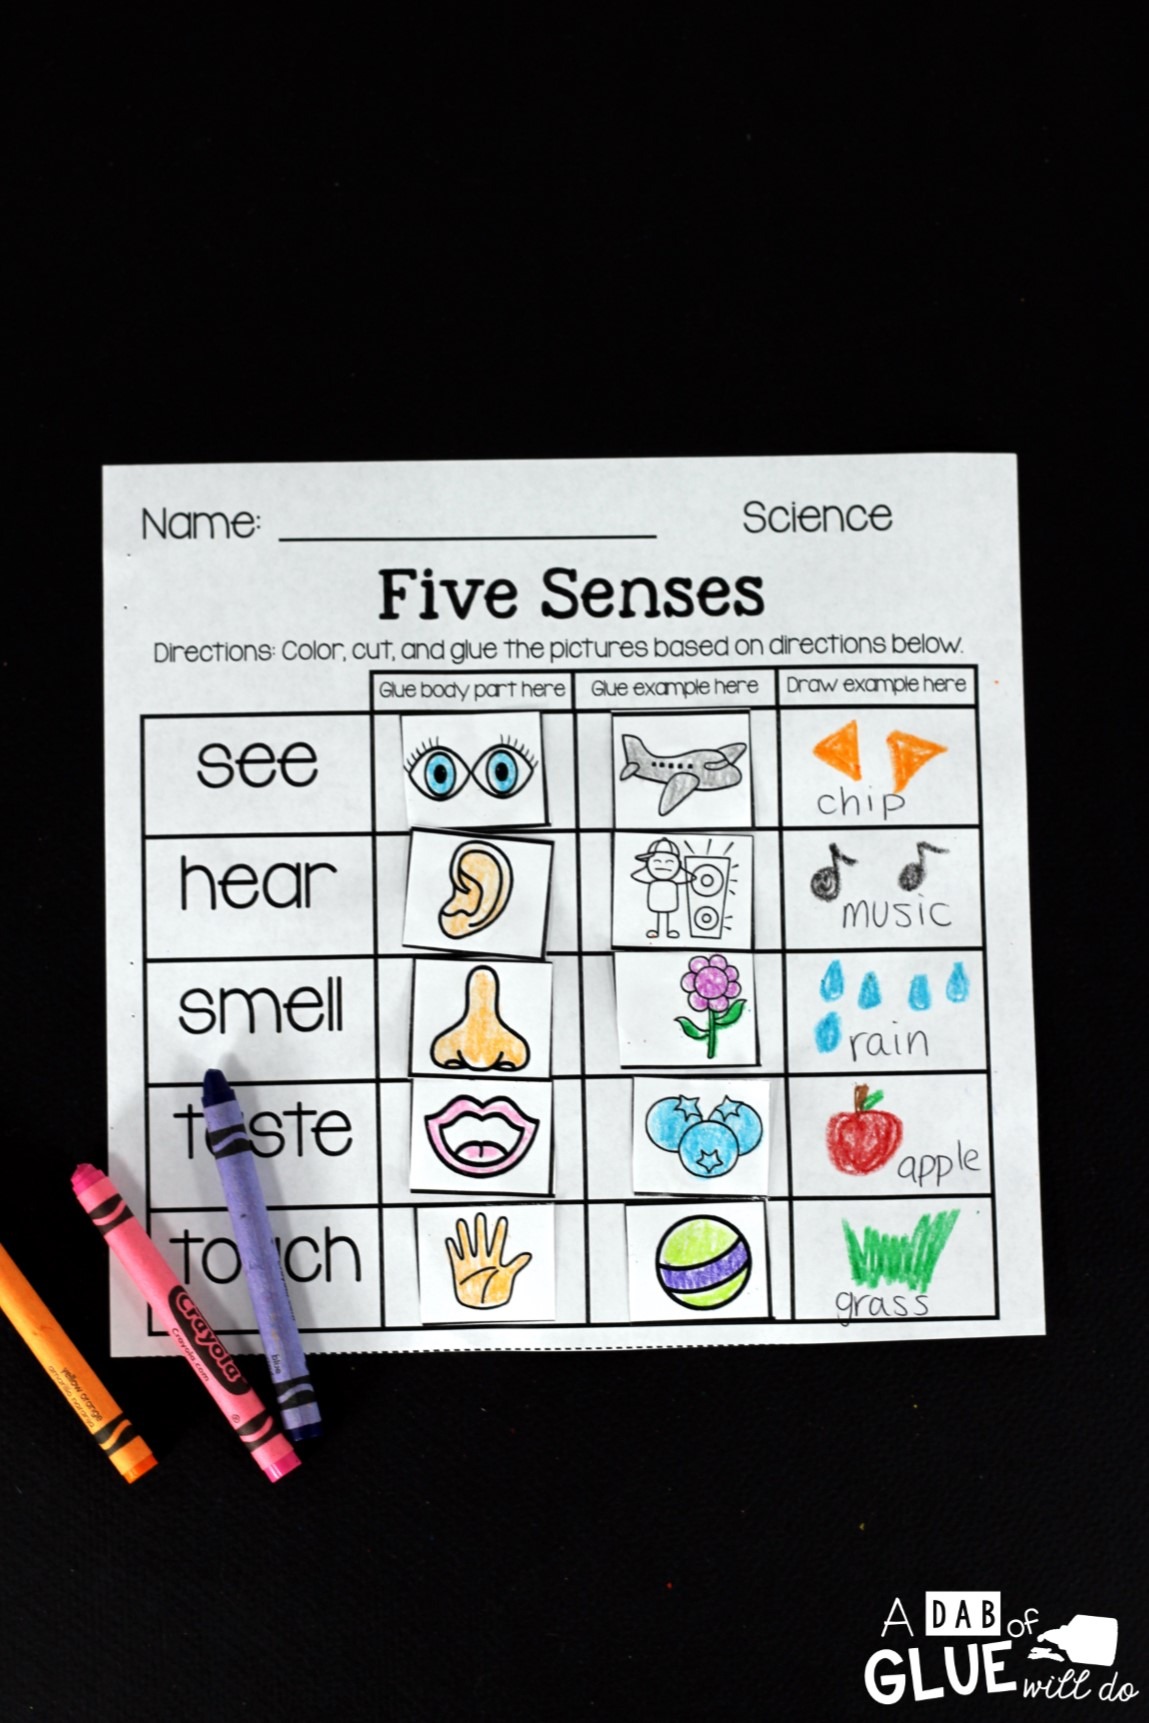 The perfect NO PREP First Grade Summer Review to help your students with hands-on learning over summer break! Give your students going into Second Grade fun review printables to help prevent the summer slide and set them up for Second Grade success. This review is packed full of engaging homework review activities that will bring a smile to their sweet faces as they work on math, language arts, social studies, and science! Parents will enjoy the student's focus on summer homework and Second Grade teachers will LOVE their new students ready for Second Grade work.